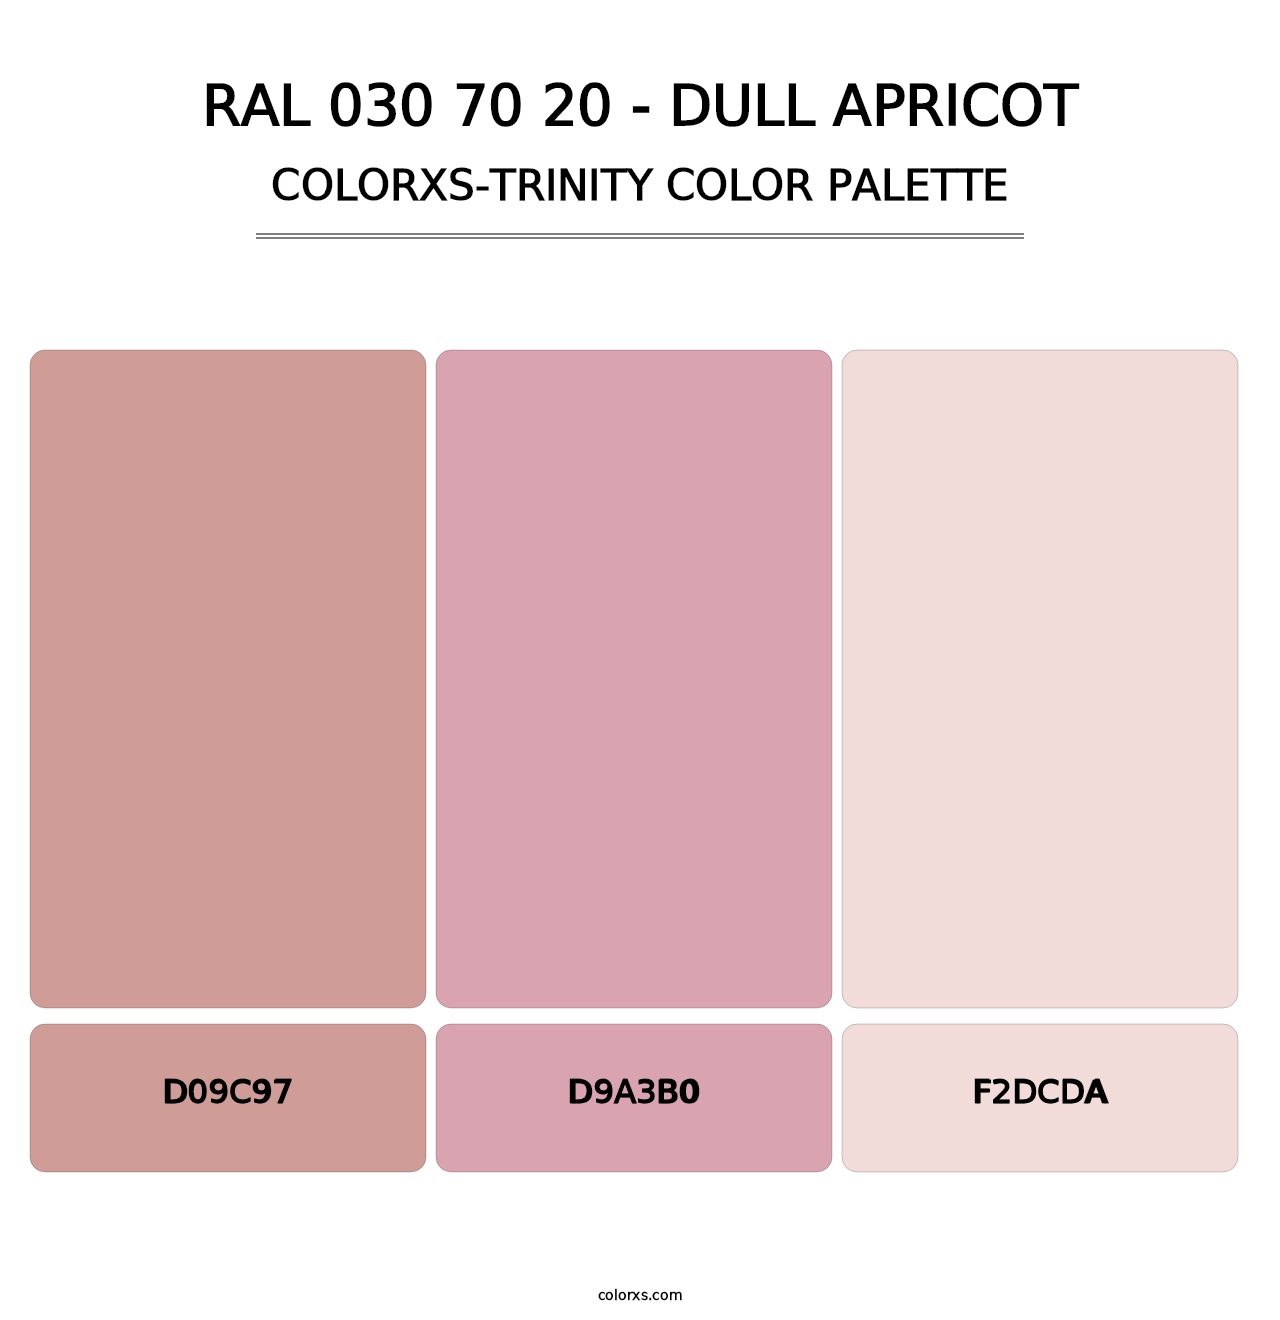 RAL 030 70 20 - Dull Apricot - Colorxs Trinity Palette